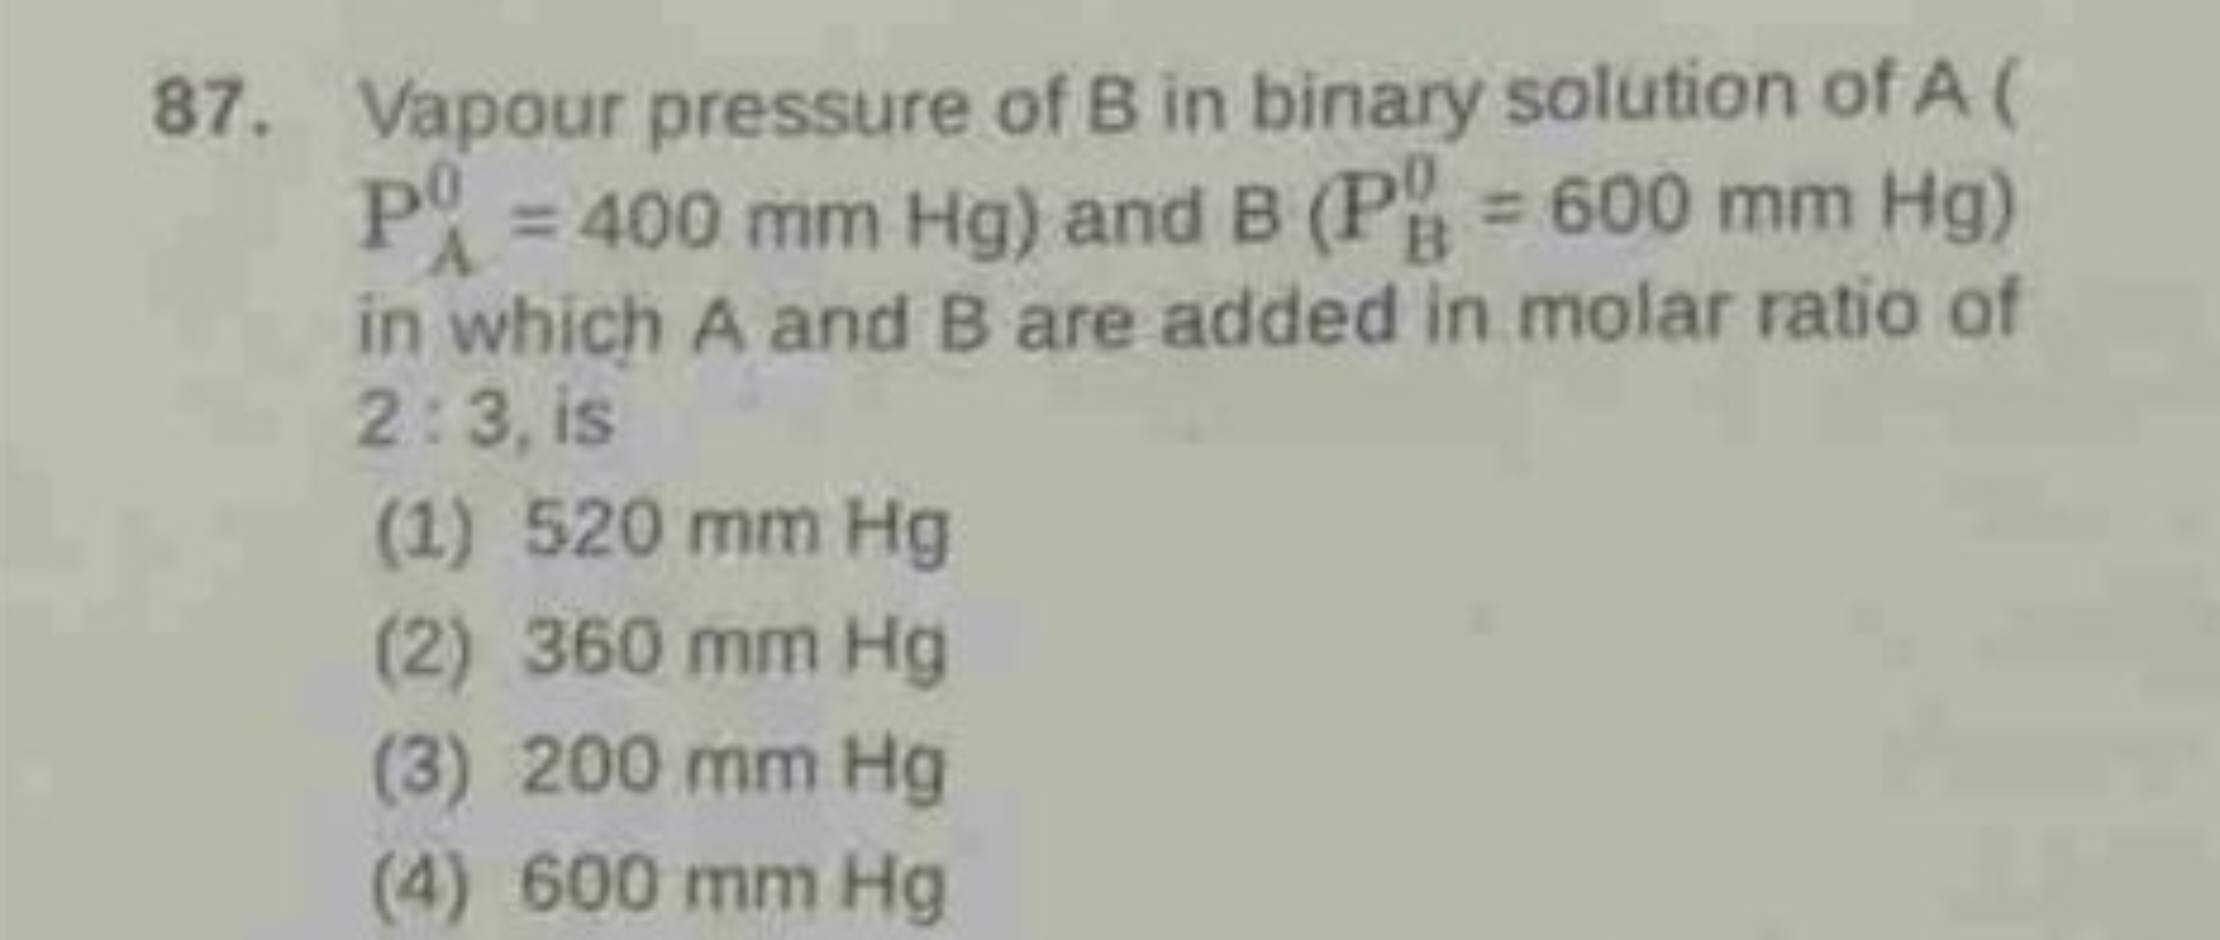 Vapour pressure of B in binary solution of A( PA0​=400 mmHg) and B(PB0